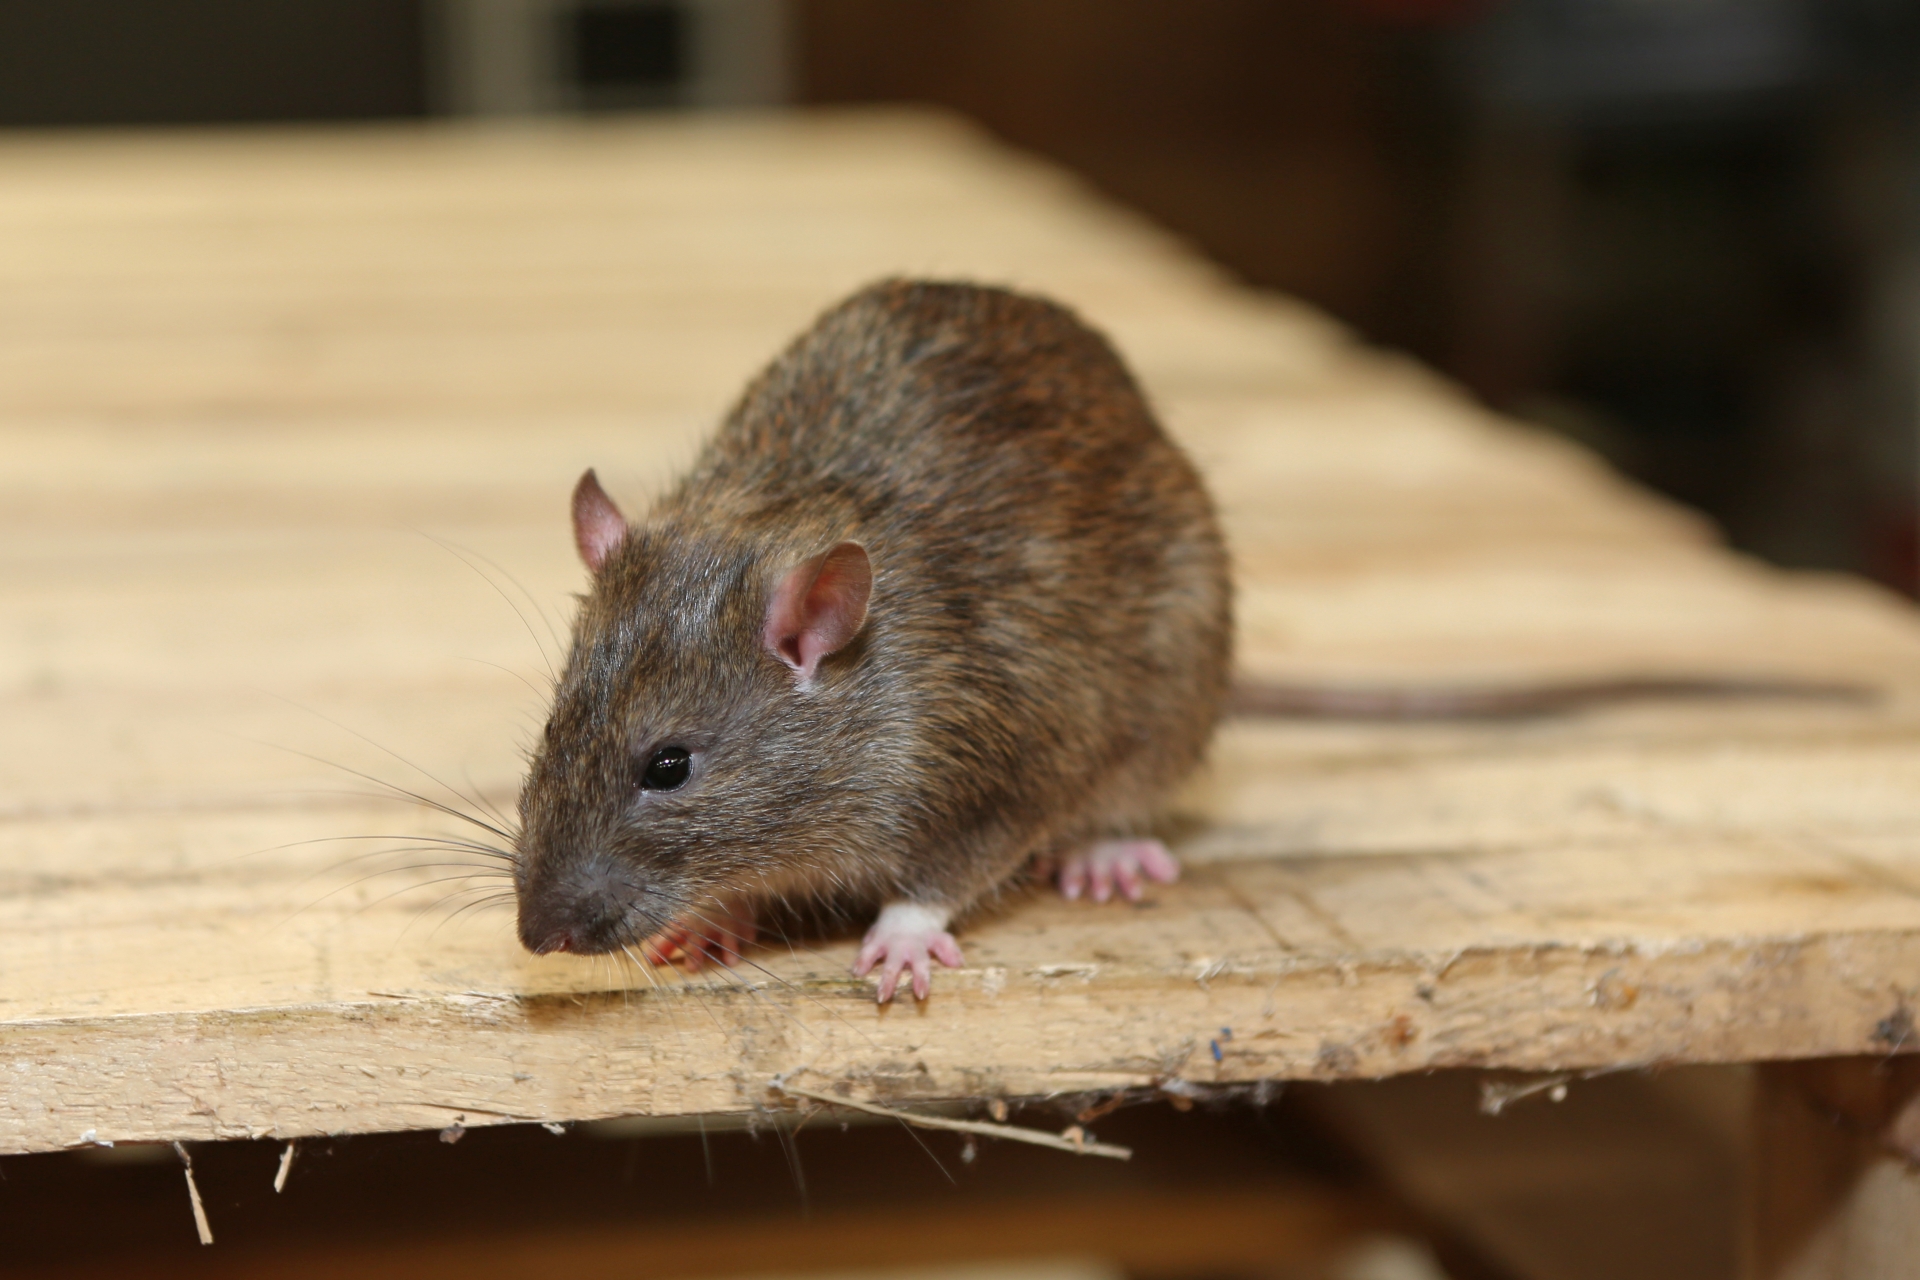 Rat Control, Pest Control in Walton-on-Thames, Hersham, KT12. Call Now 020 8166 9746